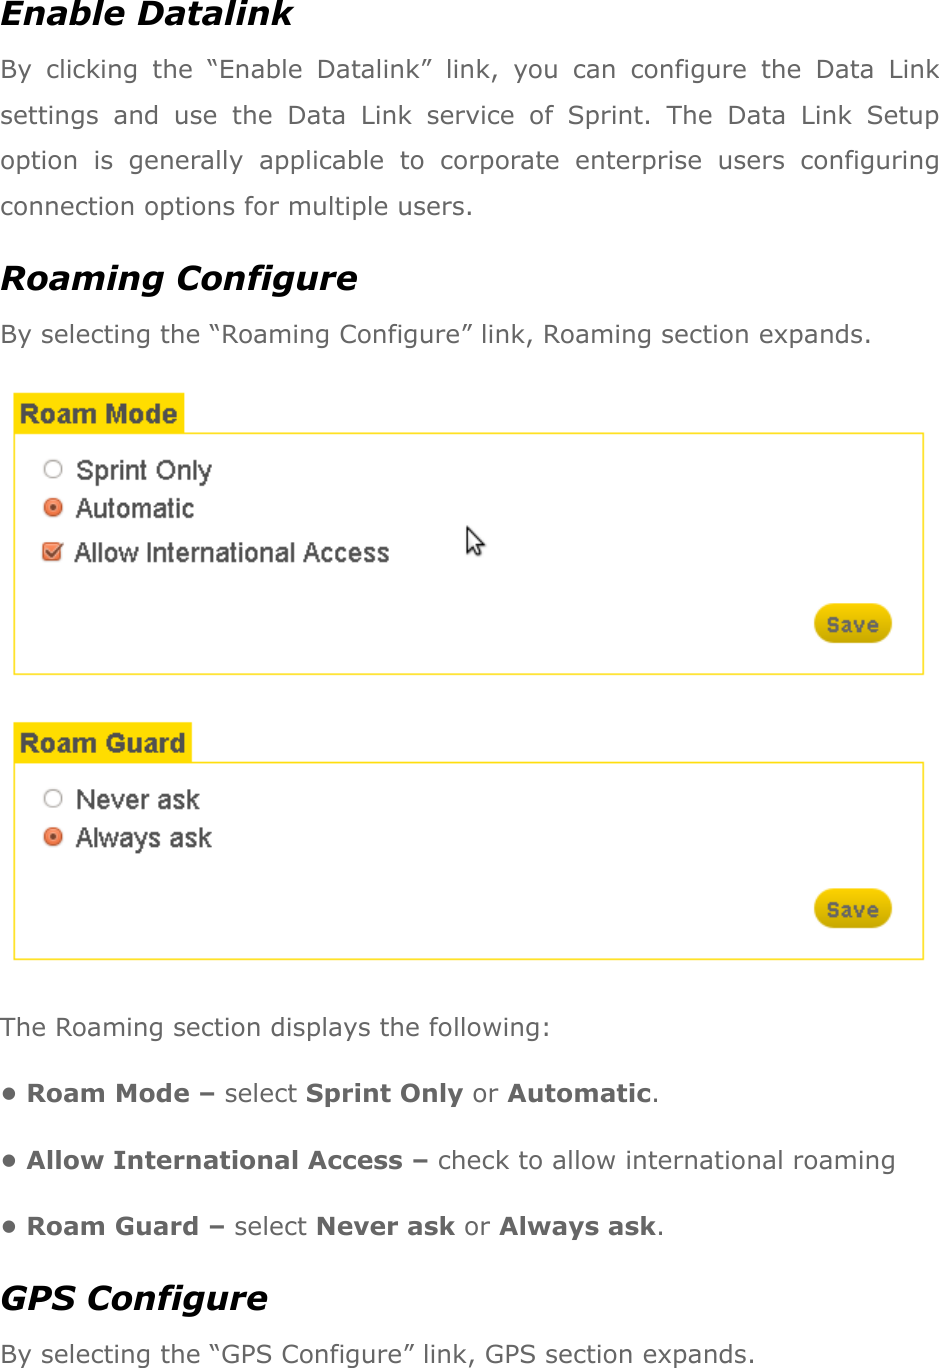 Enable Datalink By  clicking  the  “Enable  Datalink”  link,  you  can  configure  the  Data  Link settings  and  use  the  Data  Link  service  of  Sprint.  The  Data  Link  Setup option  is  generally  applicable  to  corporate  enterprise  users  configuring connection options for multiple users. Roaming Configure By selecting the “Roaming Configure” link, Roaming section expands.  The Roaming section displays the following: • Roam Mode – select Sprint Only or Automatic. • Allow International Access – check to allow international roaming • Roam Guard – select Never ask or Always ask. GPS Configure By selecting the “GPS Configure” link, GPS section expands. 